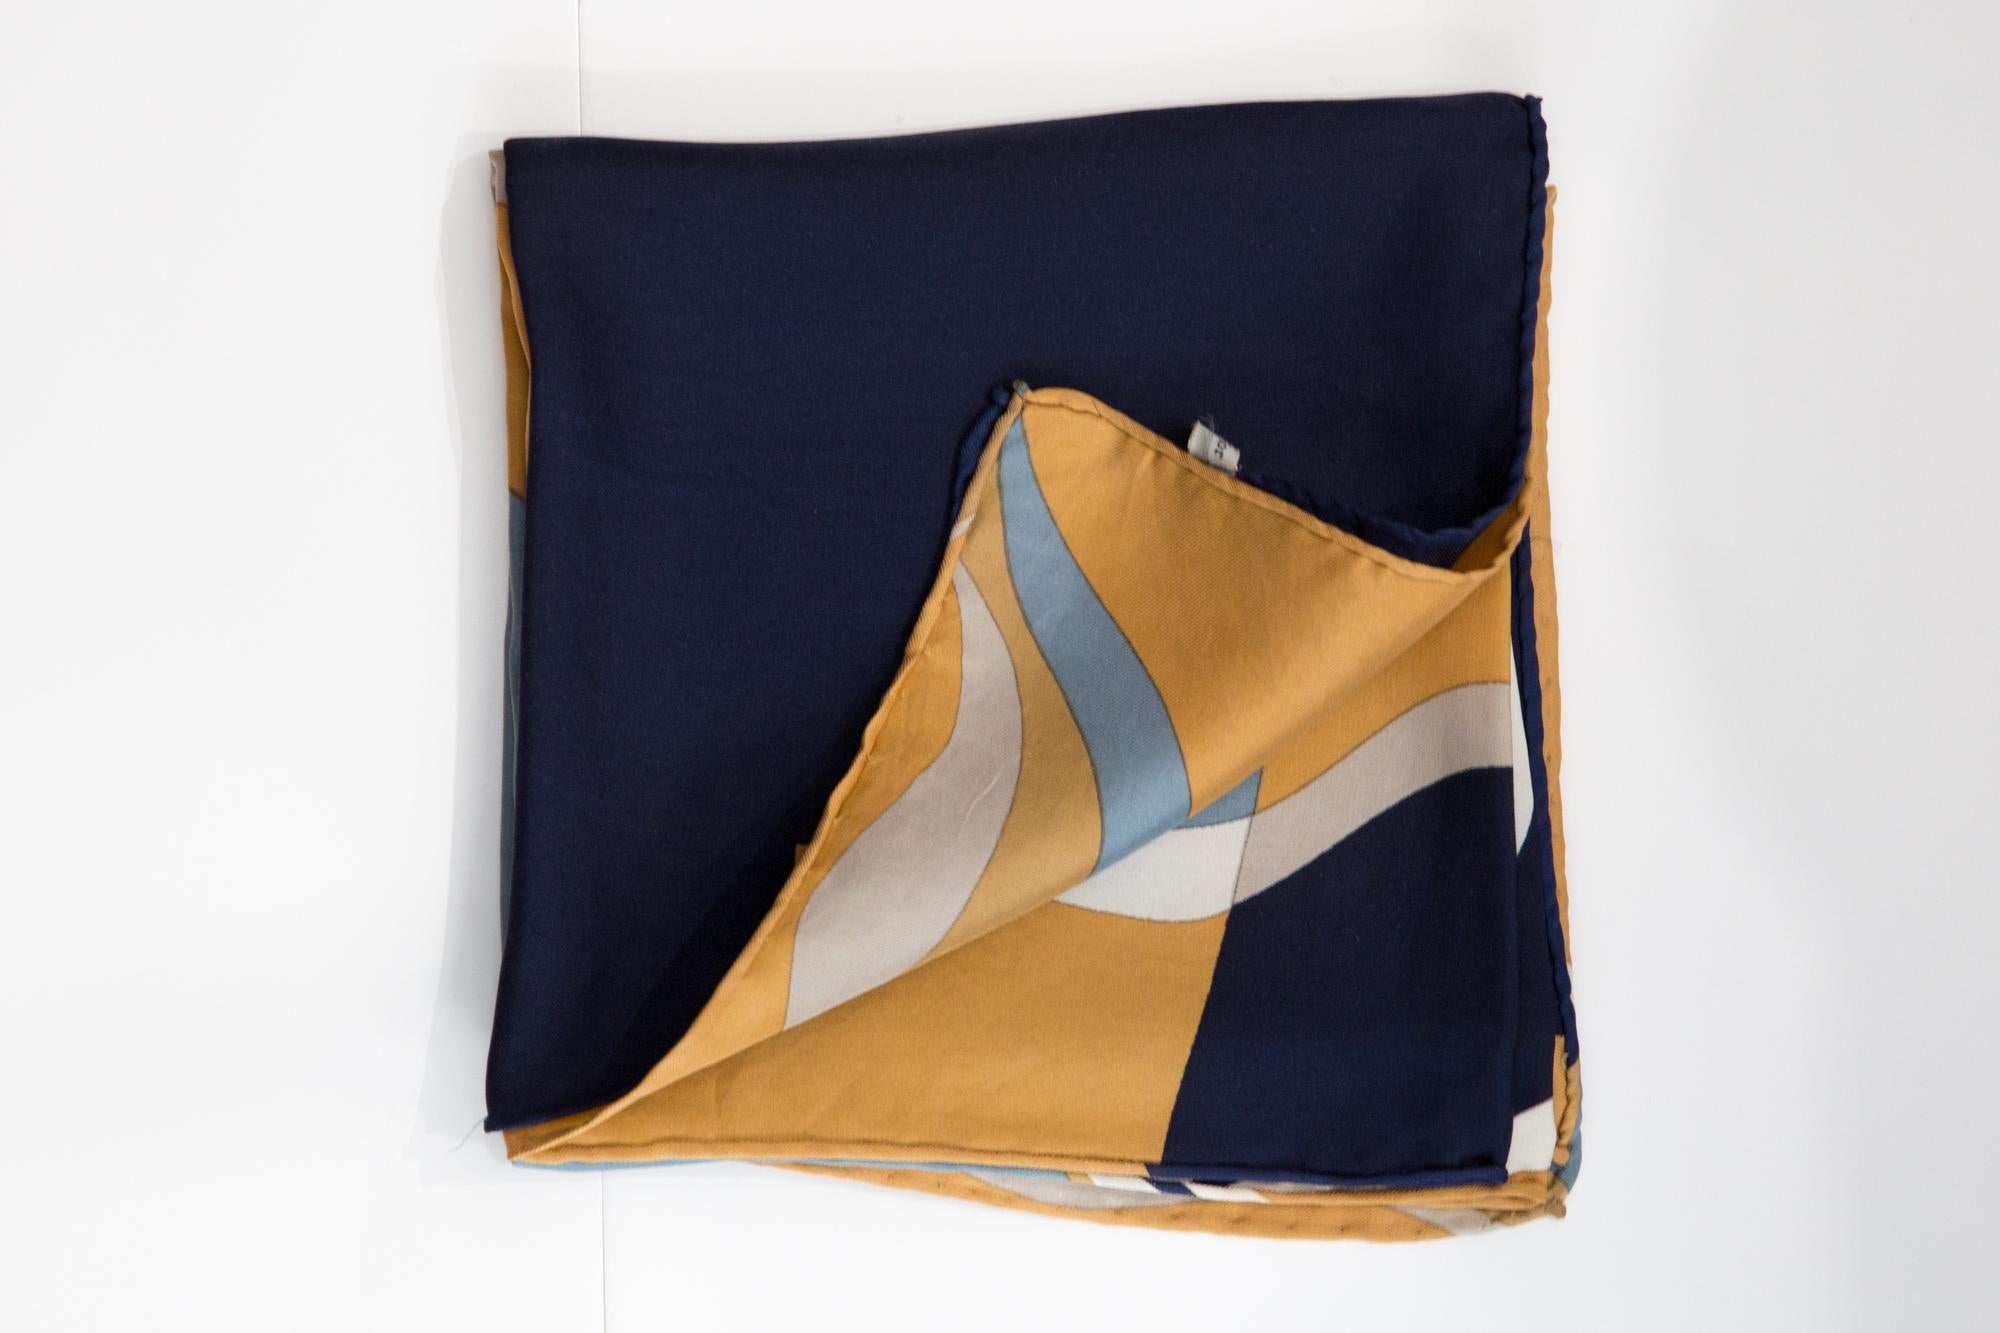 Christian Dior Silk Scarf featuring a geometric hypnotic navy print, a Christian Dior signature. 
Circa 1970s
In good vintage condition. Made in France.
30in. (77cm) X 30in. (77cm)
We guarantee you will receive this  iconic item as described and